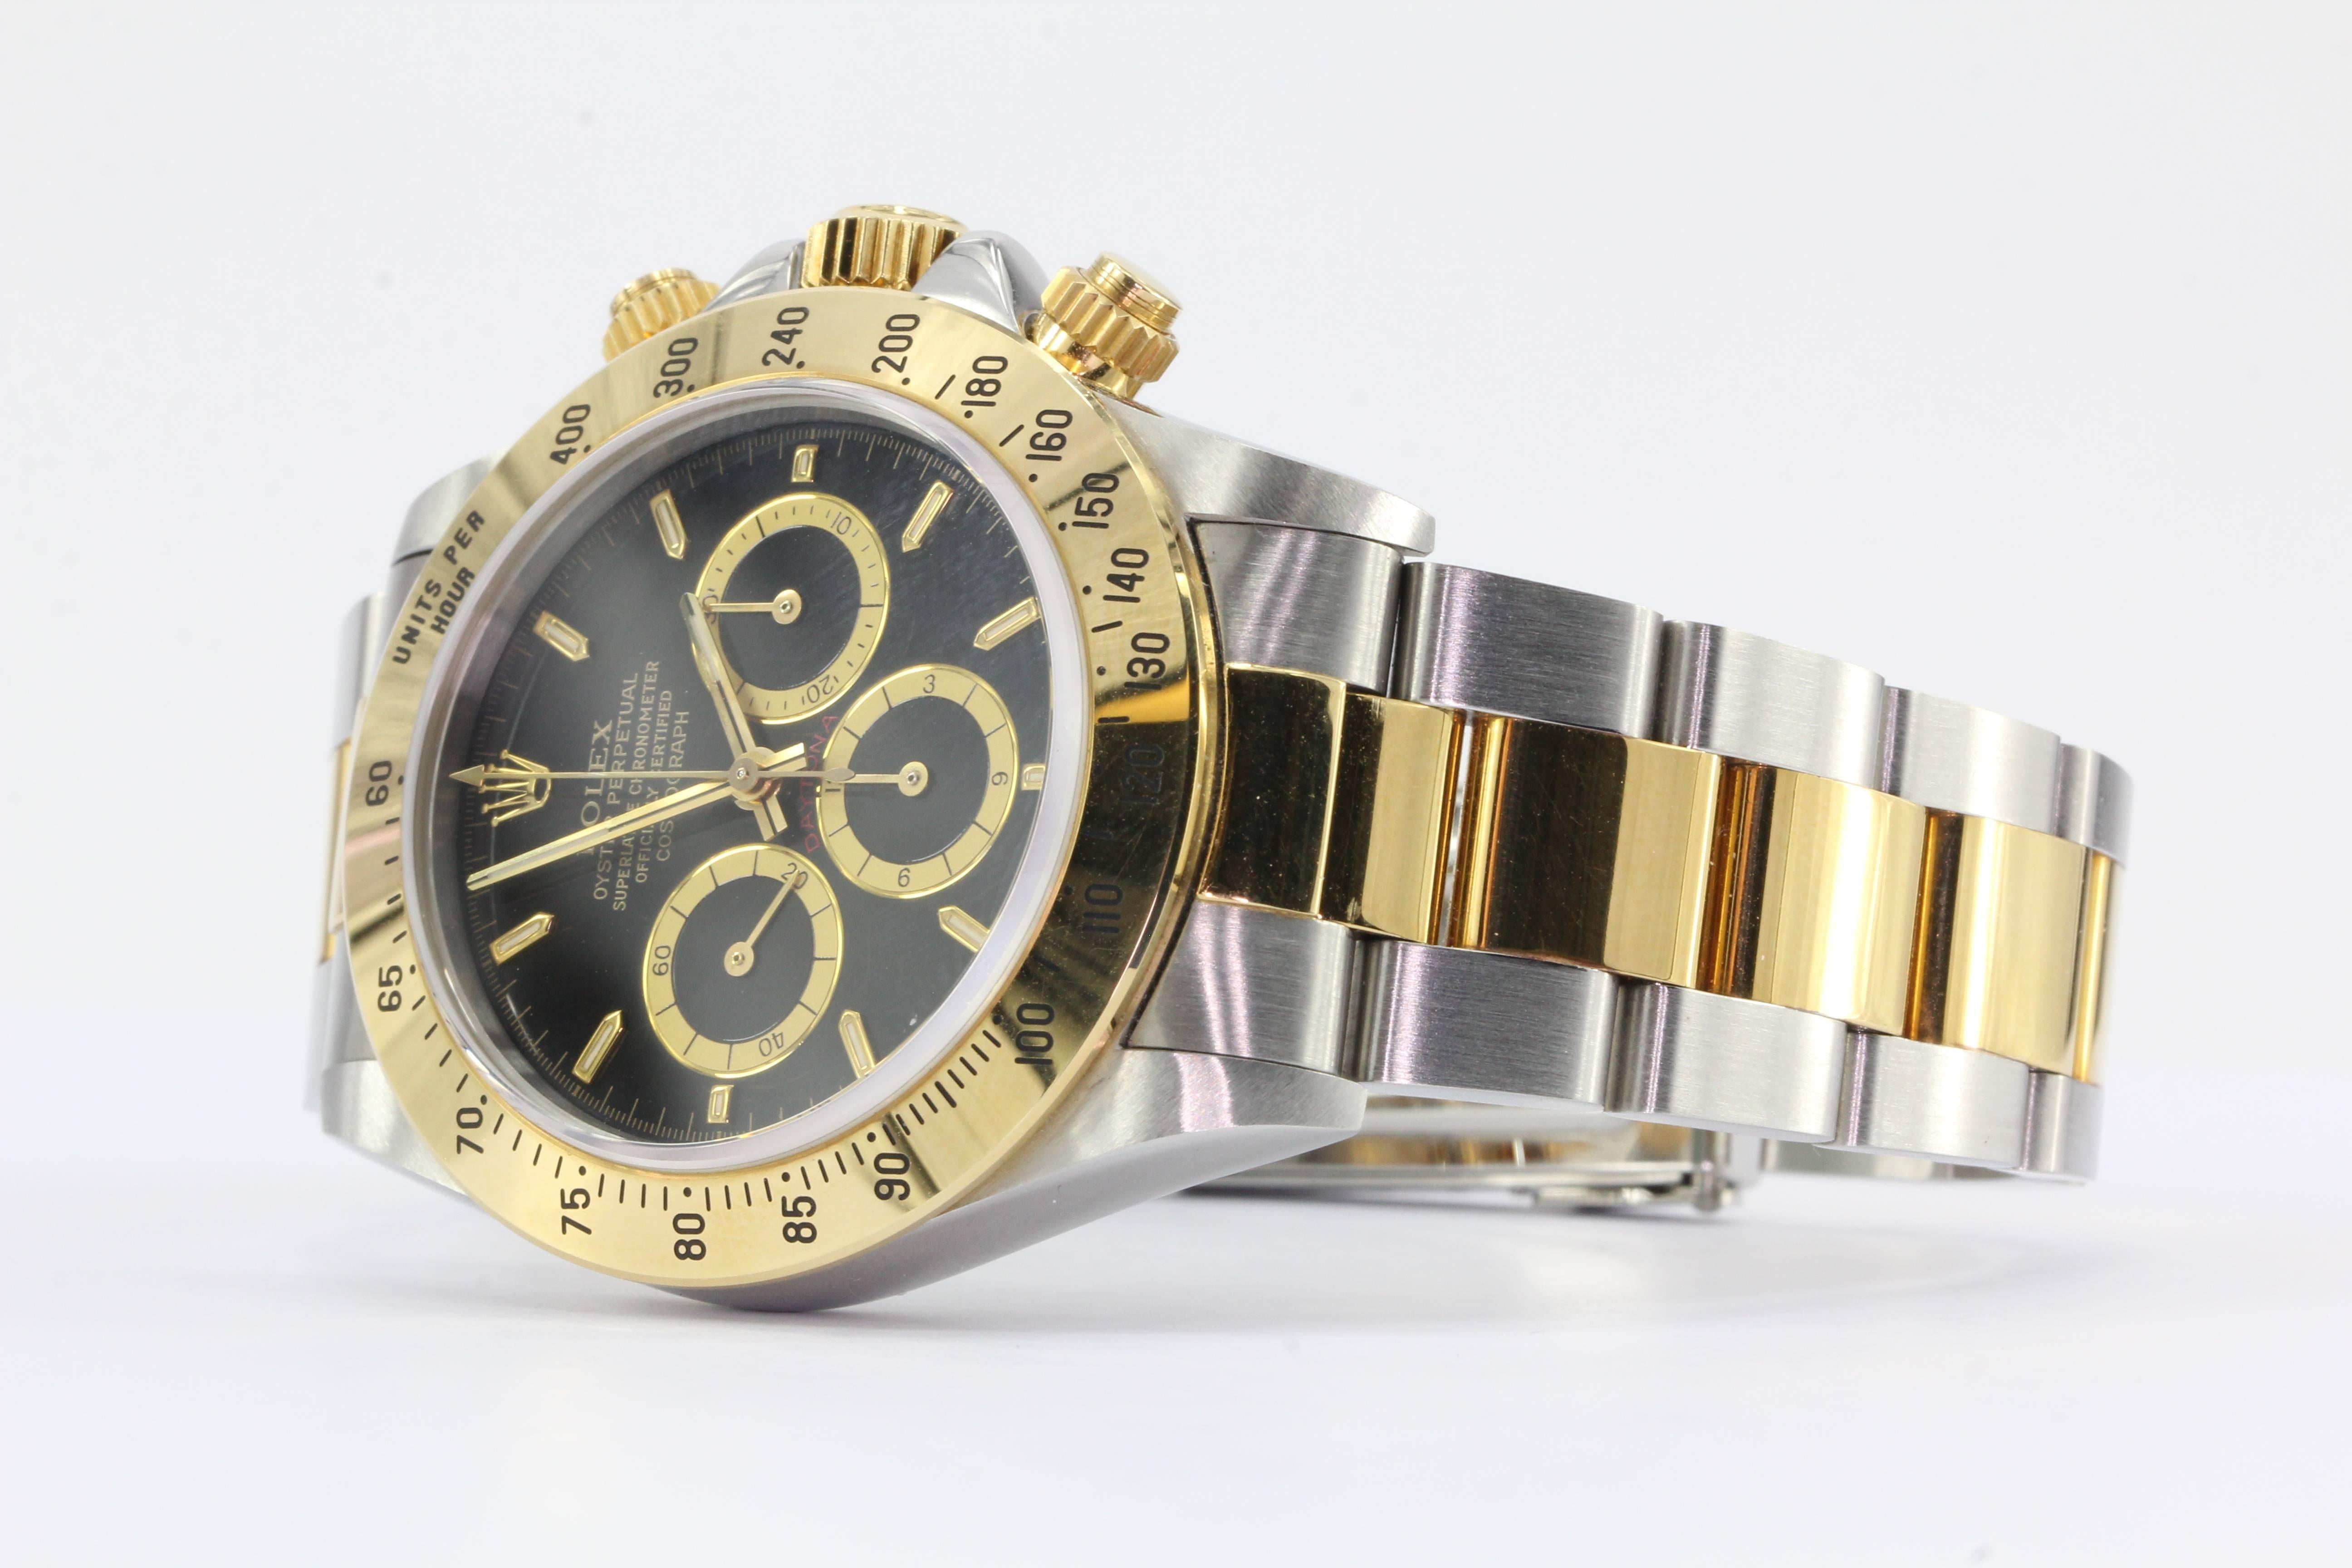 Rolex yellow gold stainless steel Oyster Perpetual Cosmograph Daytona Ref 16523 Automatic Wrist Watch for Unisex. The watch is in excellent gently used estate condition and ready to wear. It is keeping excellent time. The watch comes in its original